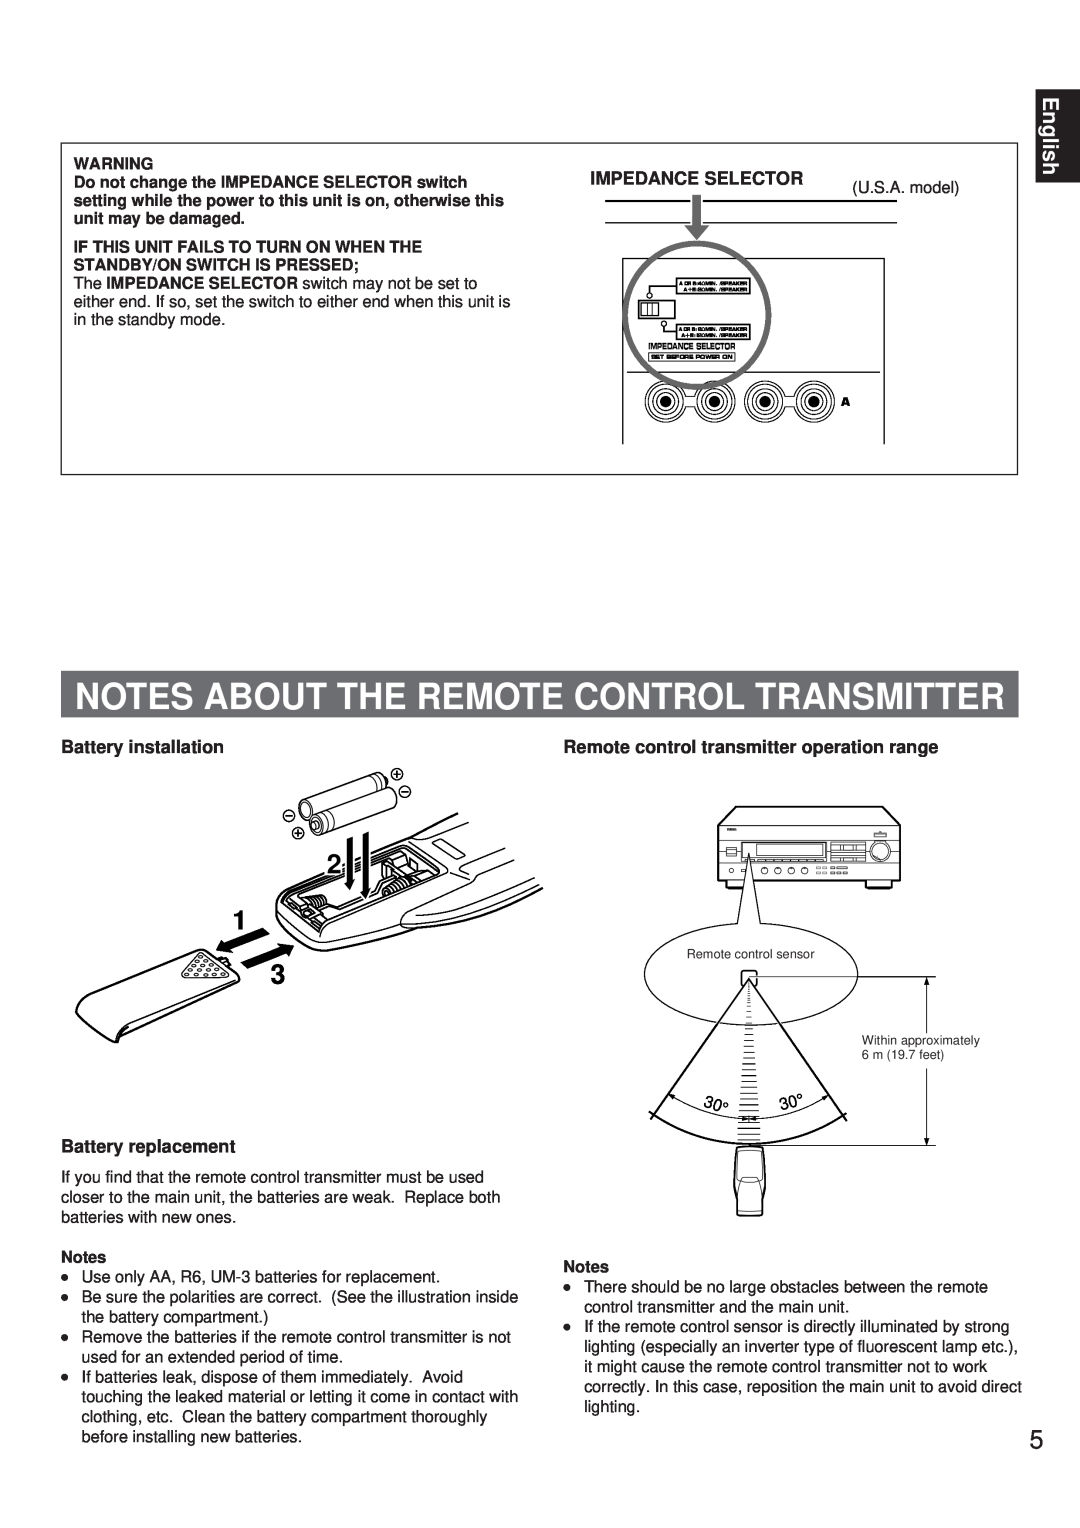 Yamaha RX-396RDS/396 Notes About The Remote Control Transmitter, 2 1, English, Impedance Selector, Battery installation 